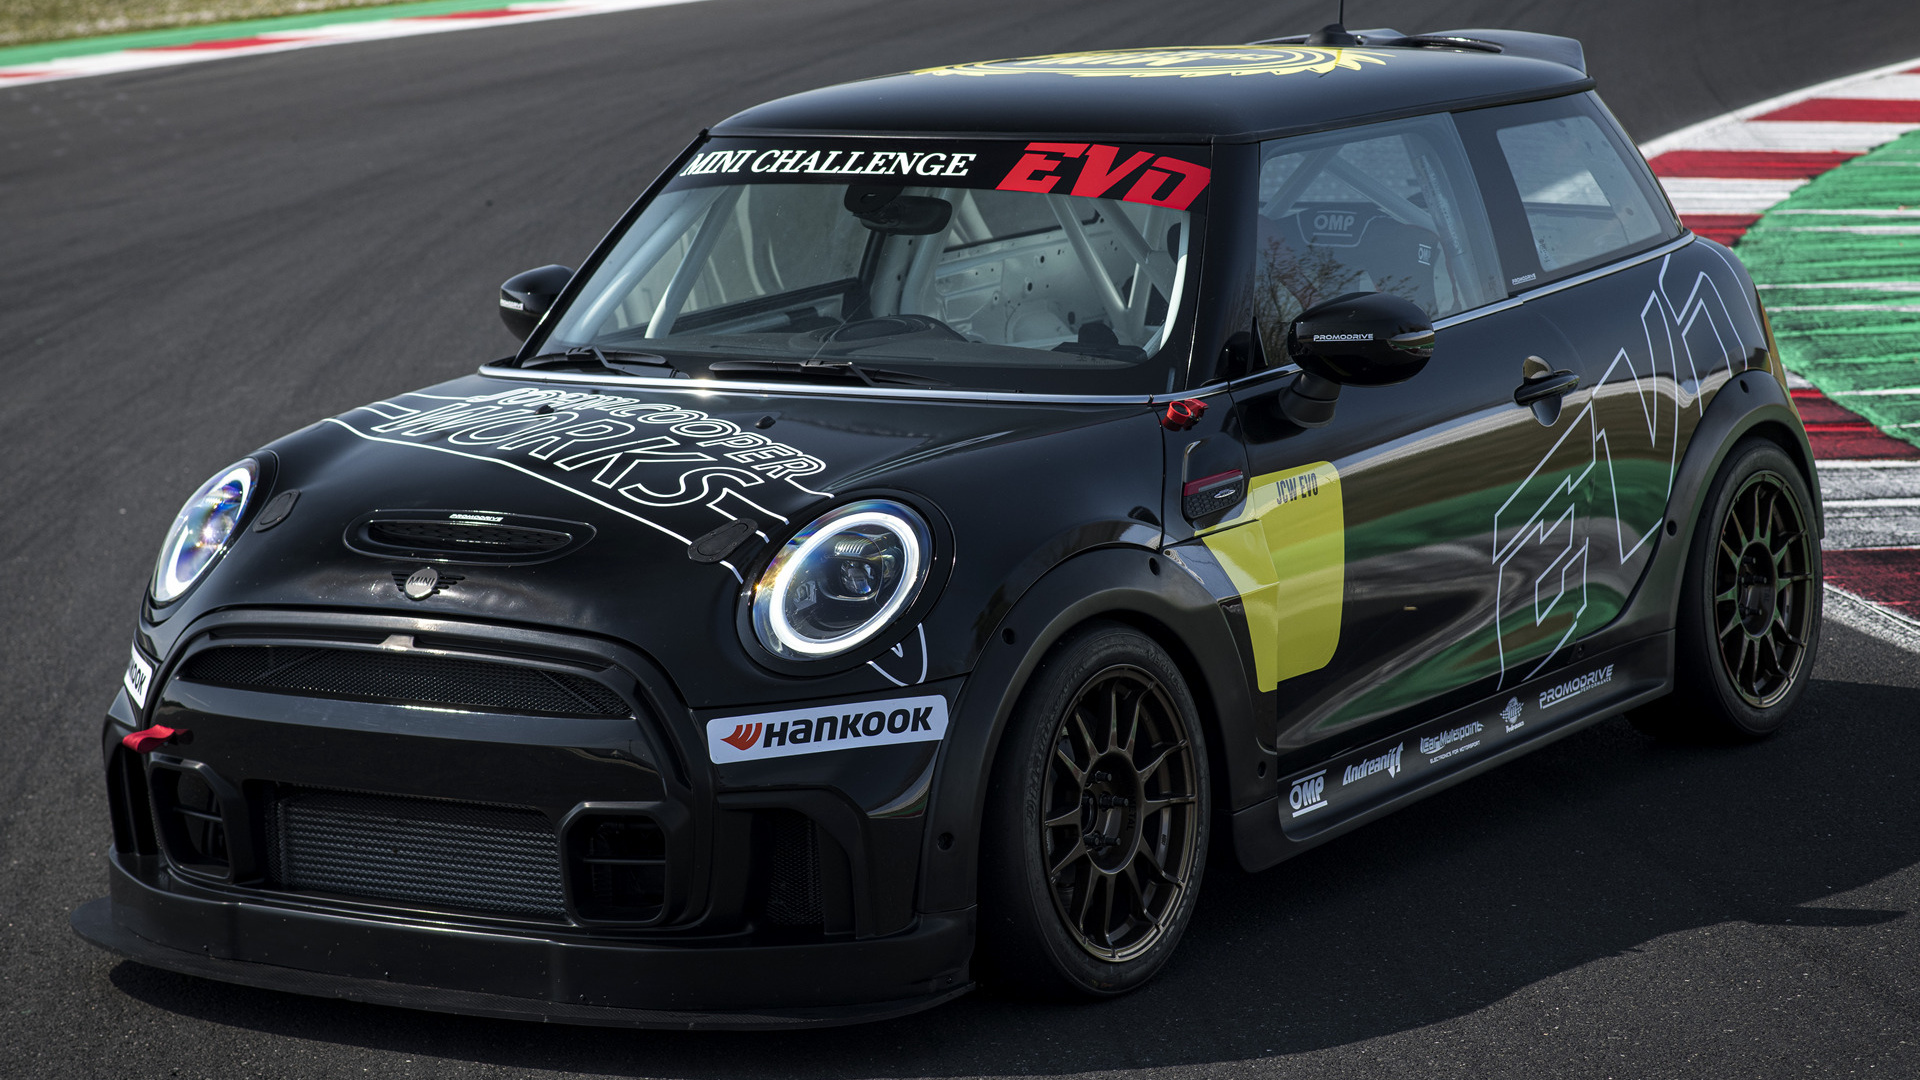 2022 Mini John Cooper Works Challenge Evo - Wallpapers and HD Images ...